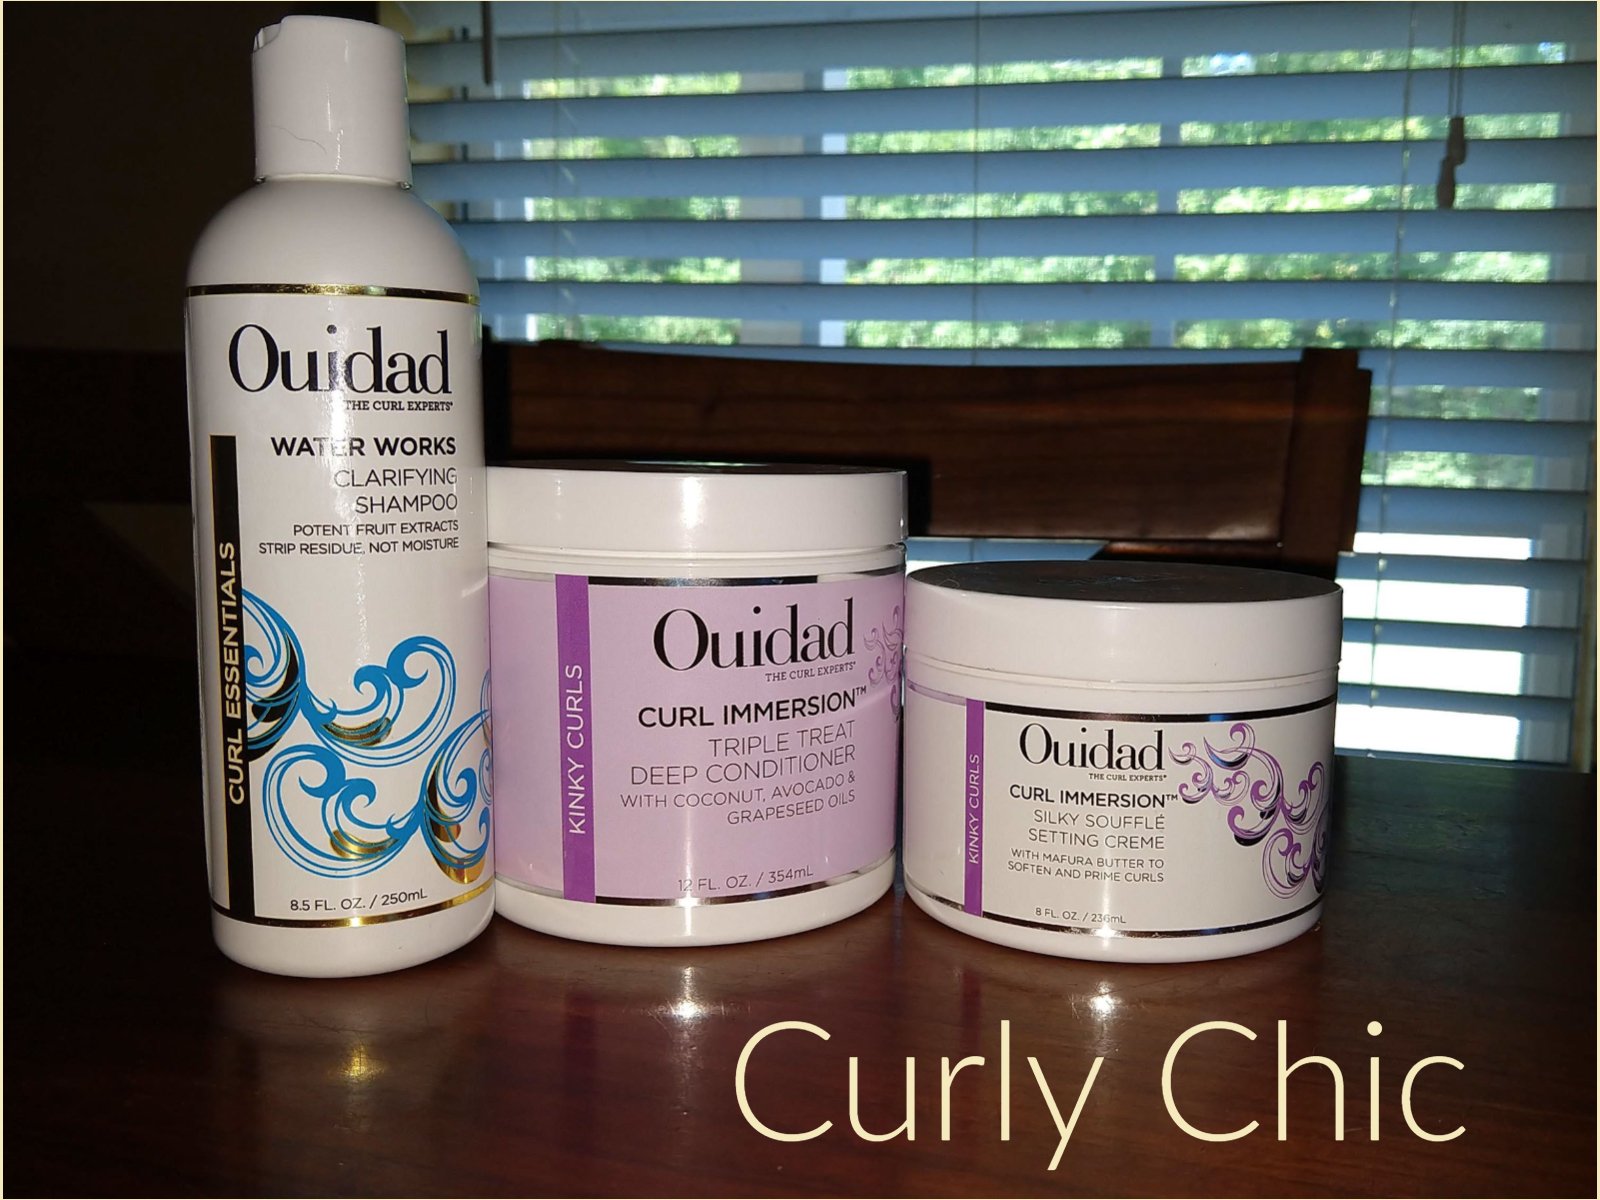 Ouidad Products for Curly Hair